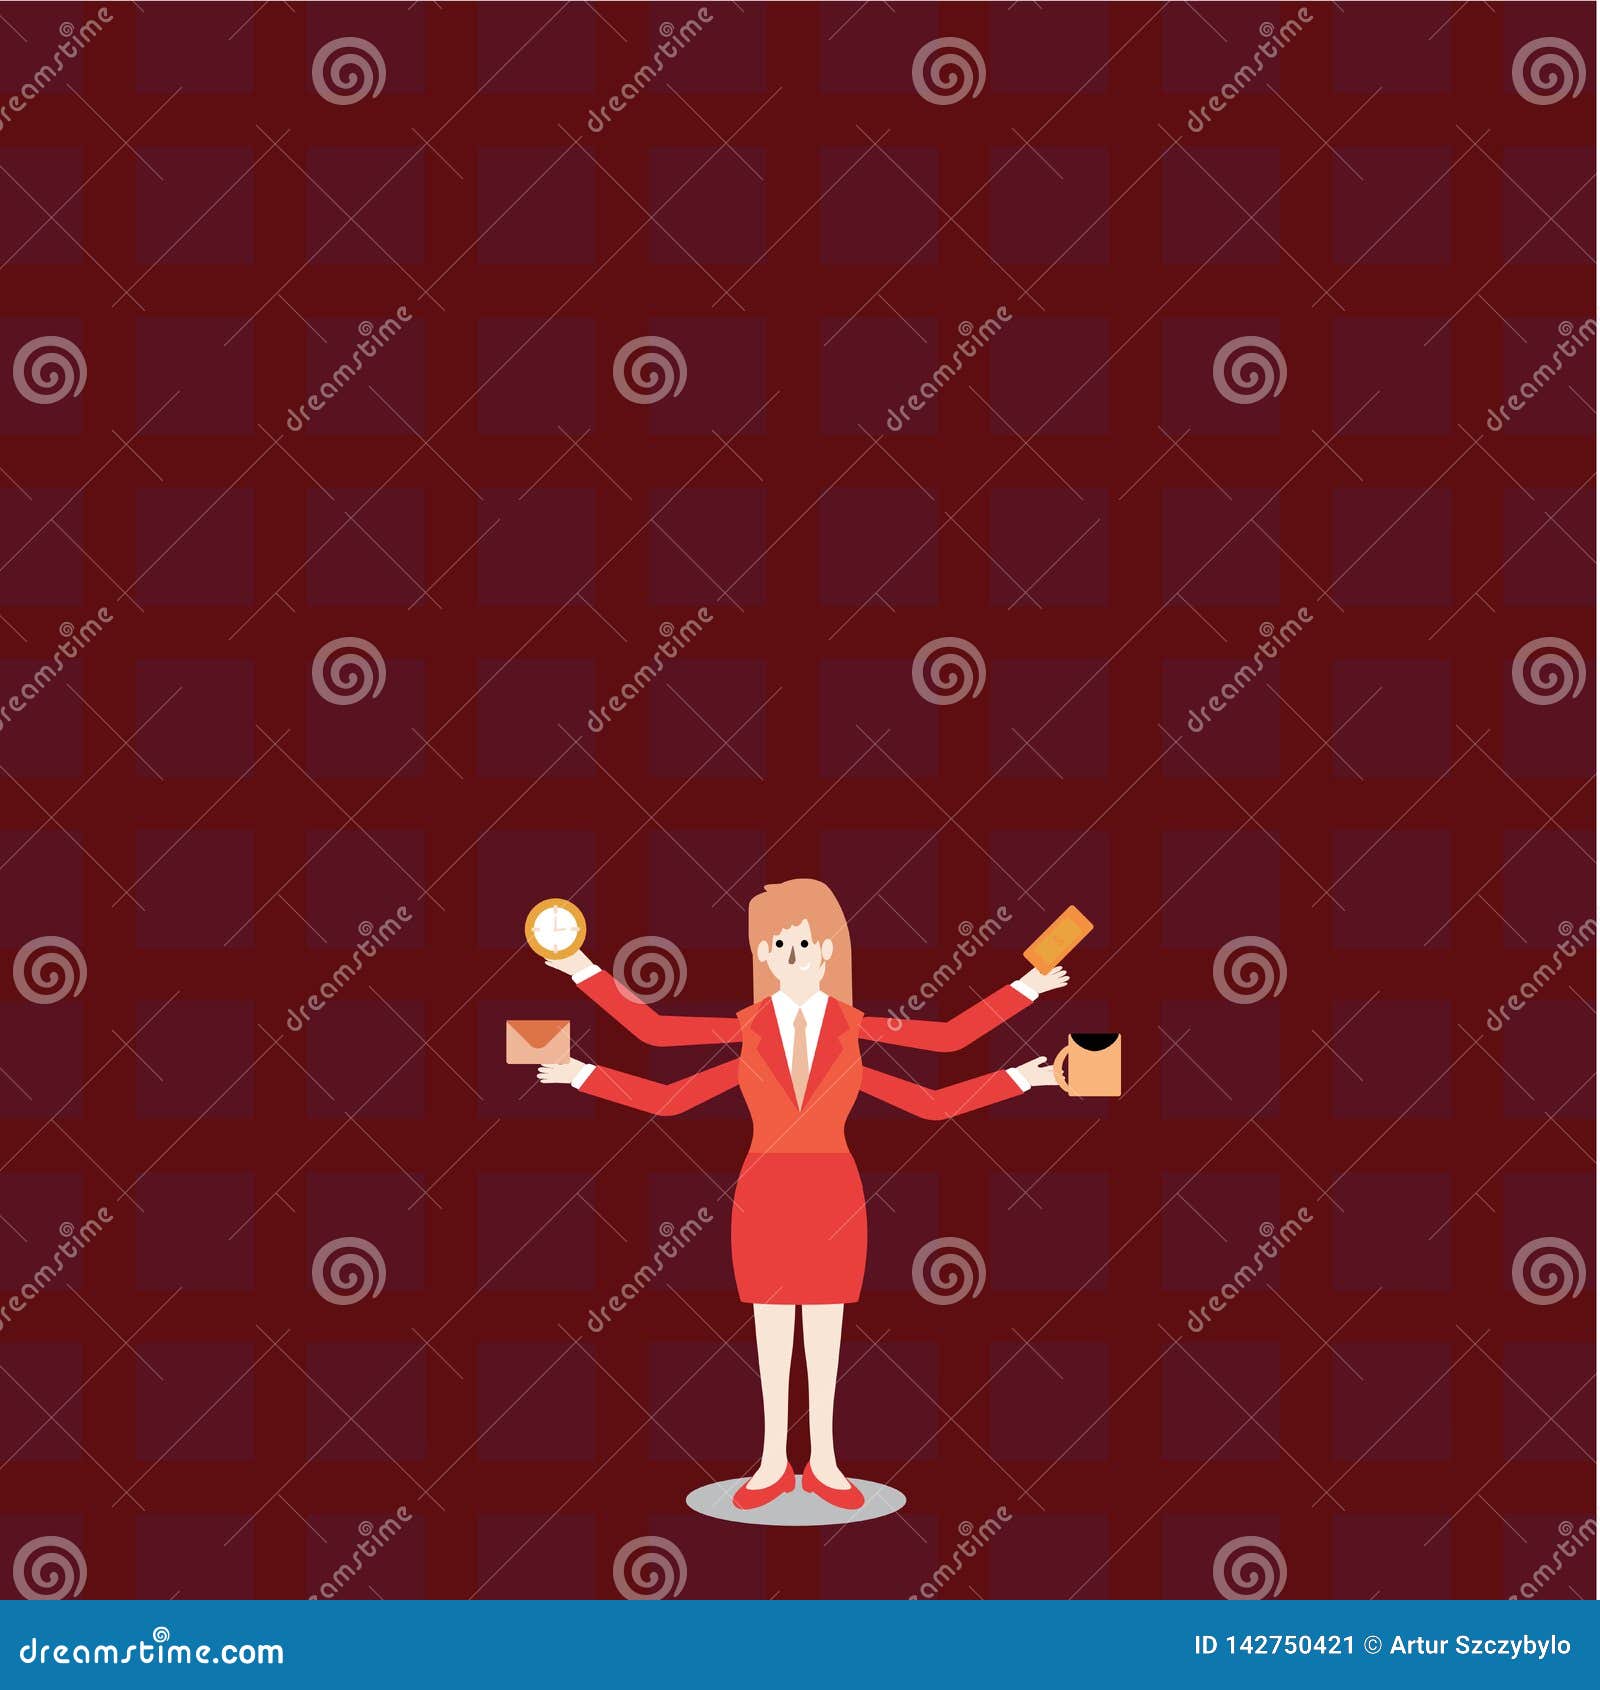 Woman in Business Suit Standing with Four Arms Exending Sideways.  Businesswoman with 4 Limbs Holding Workers Stuff Stock Vector -  Illustration of suit, businesswoman: 142750421